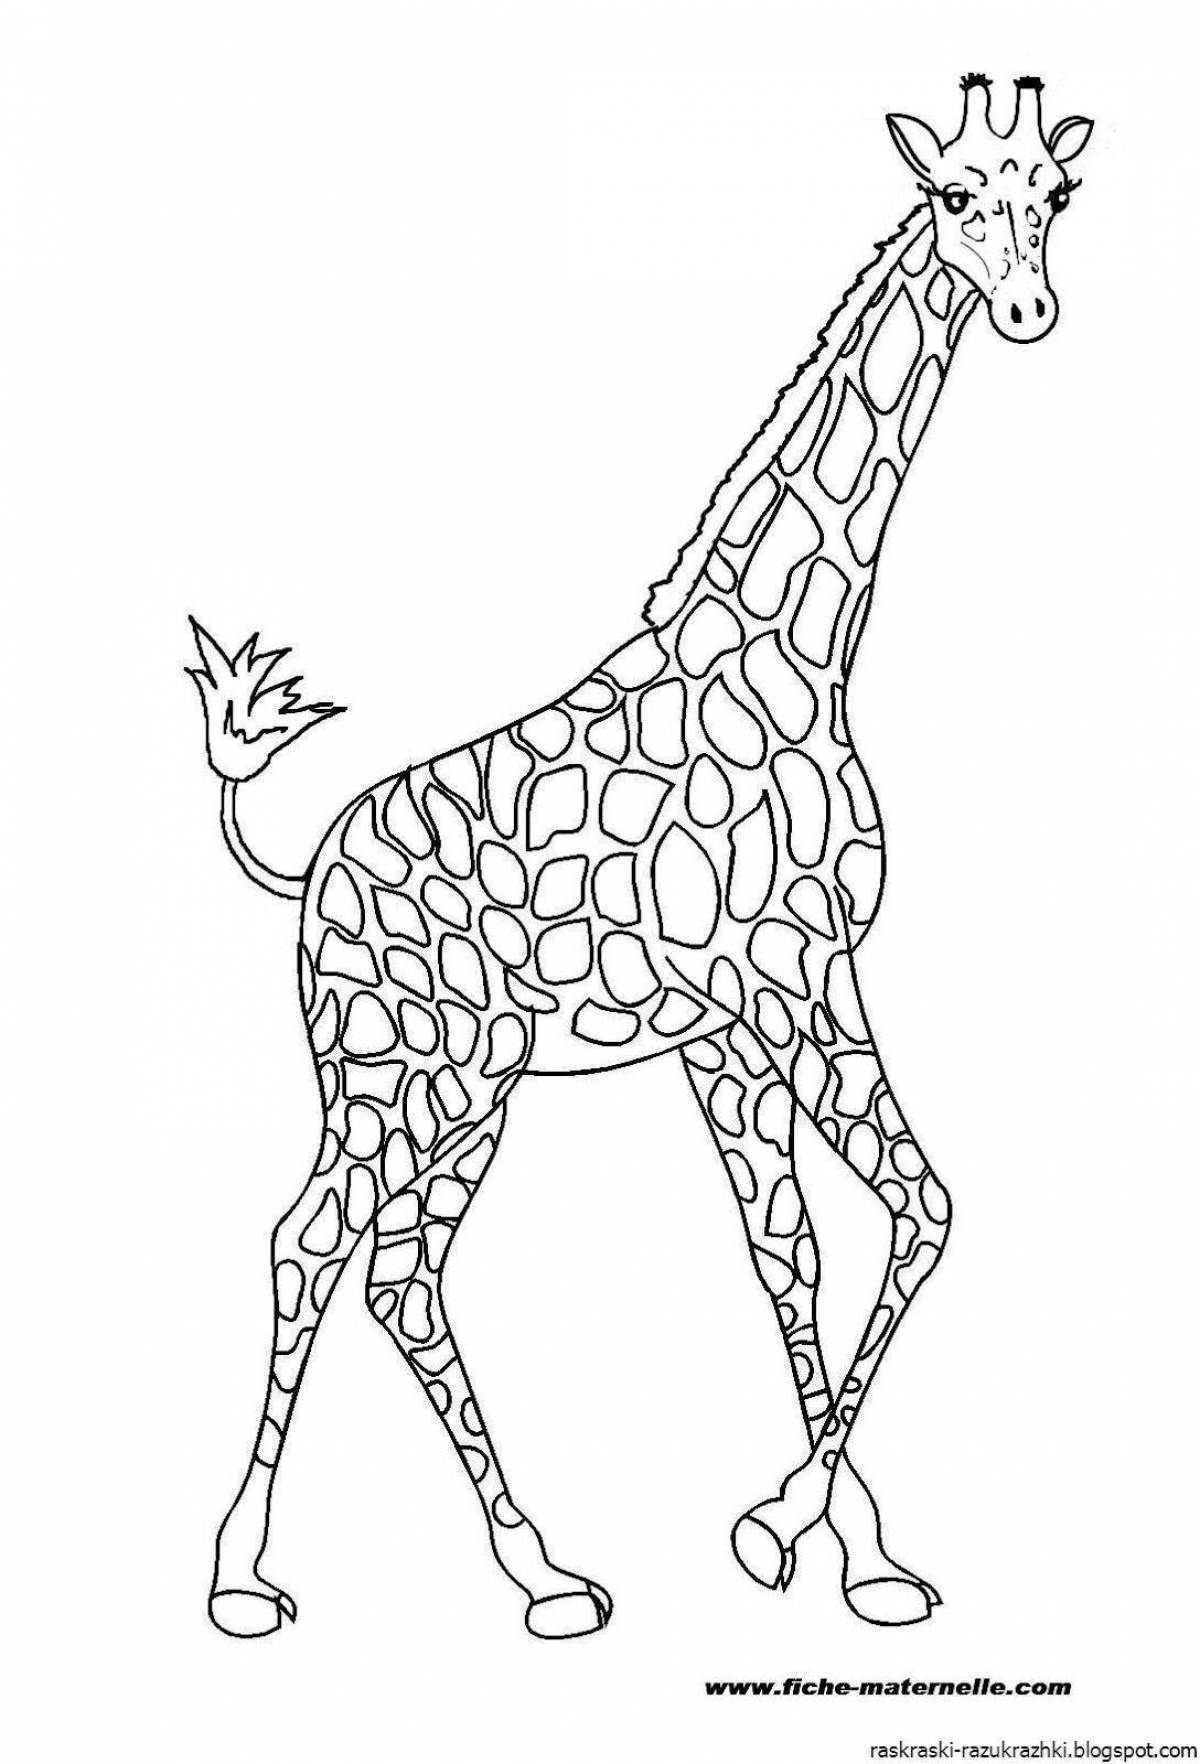 Magic giraffe coloring book for 6-7 year olds